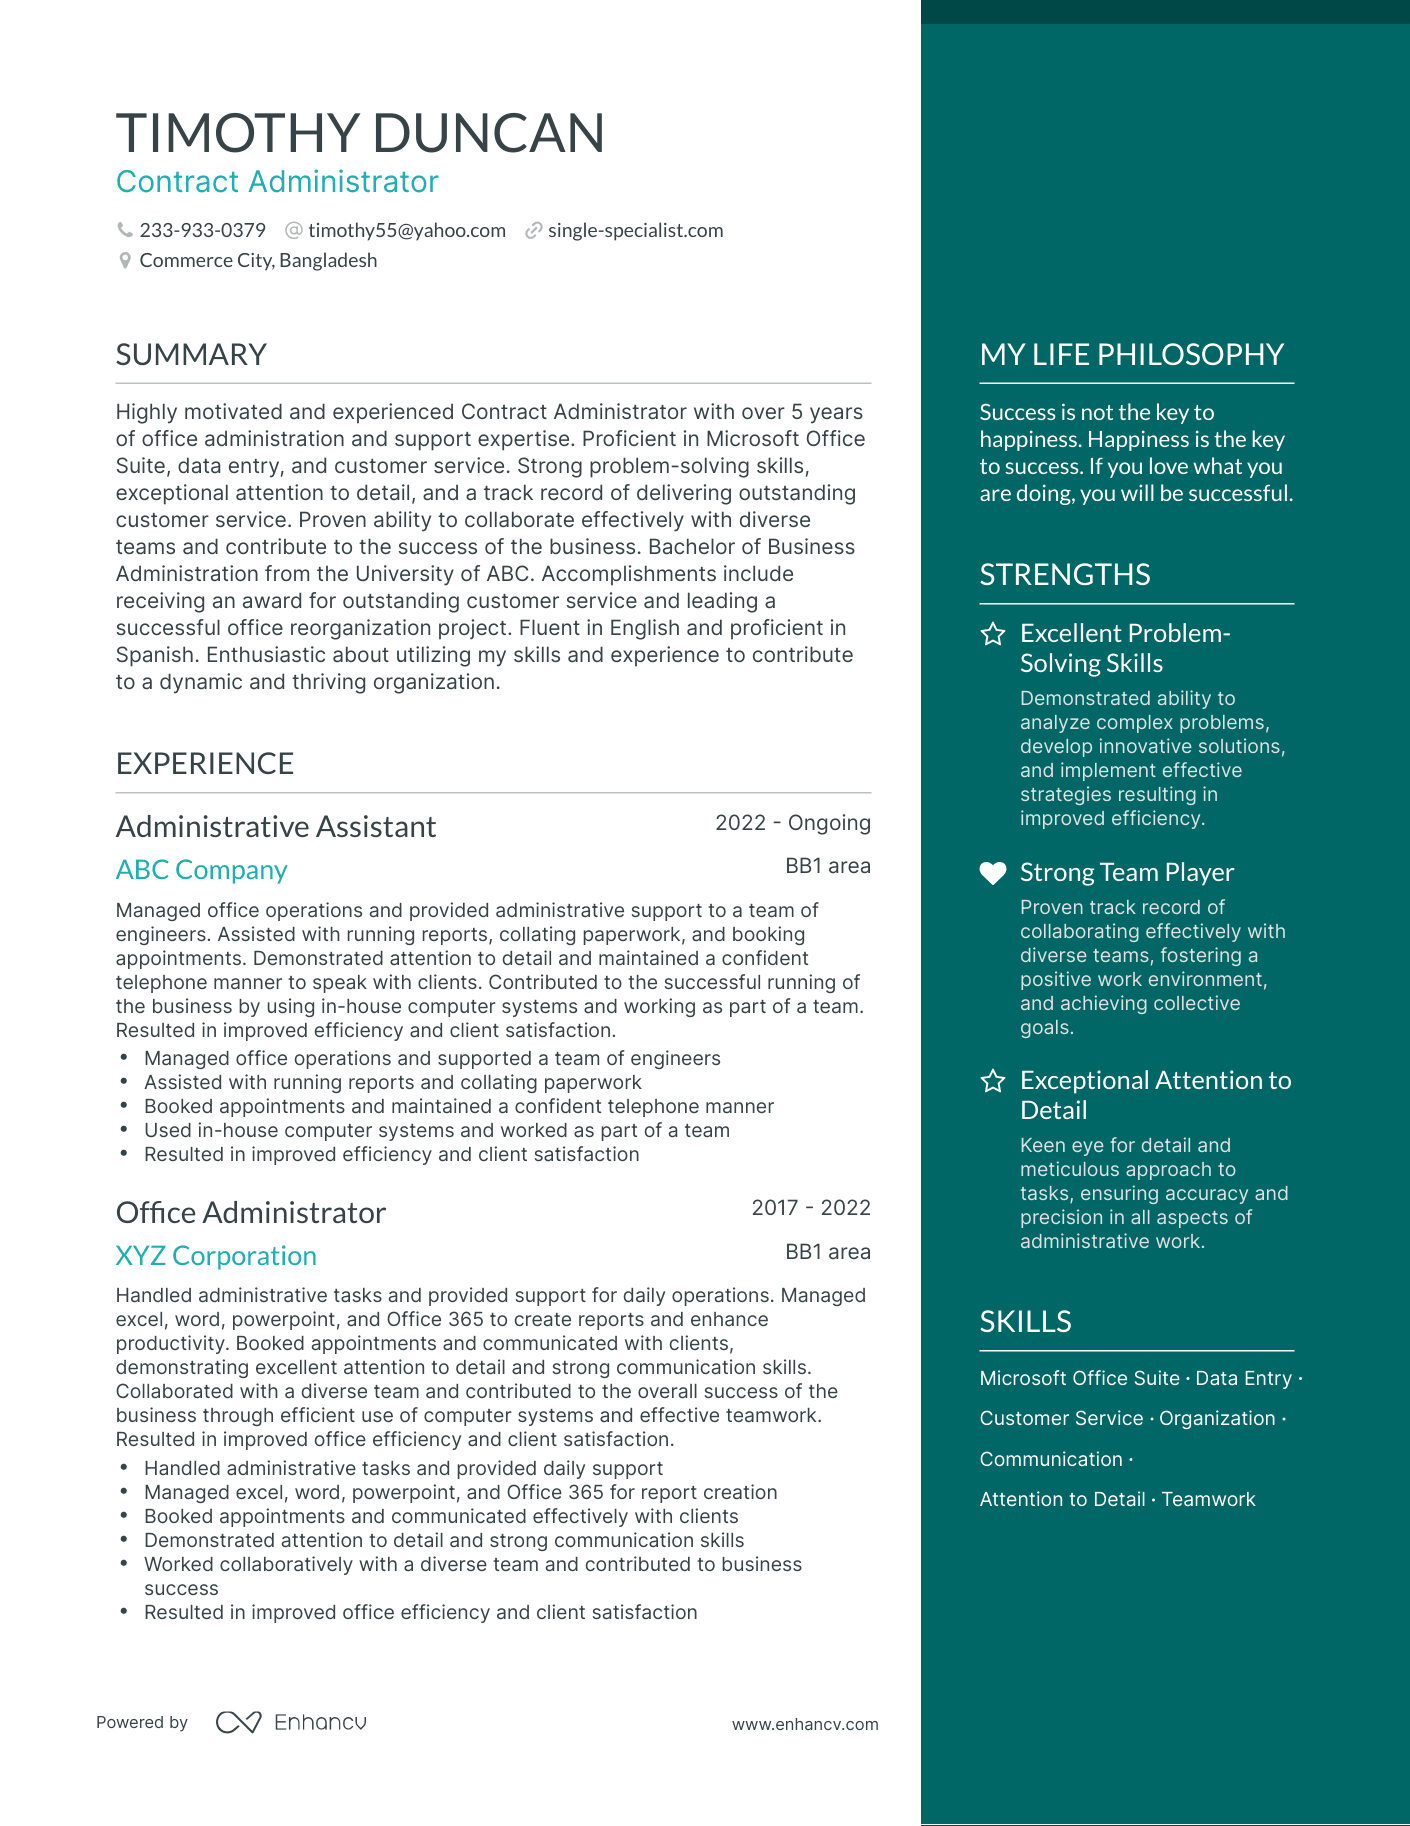 Contract Administrator resume example